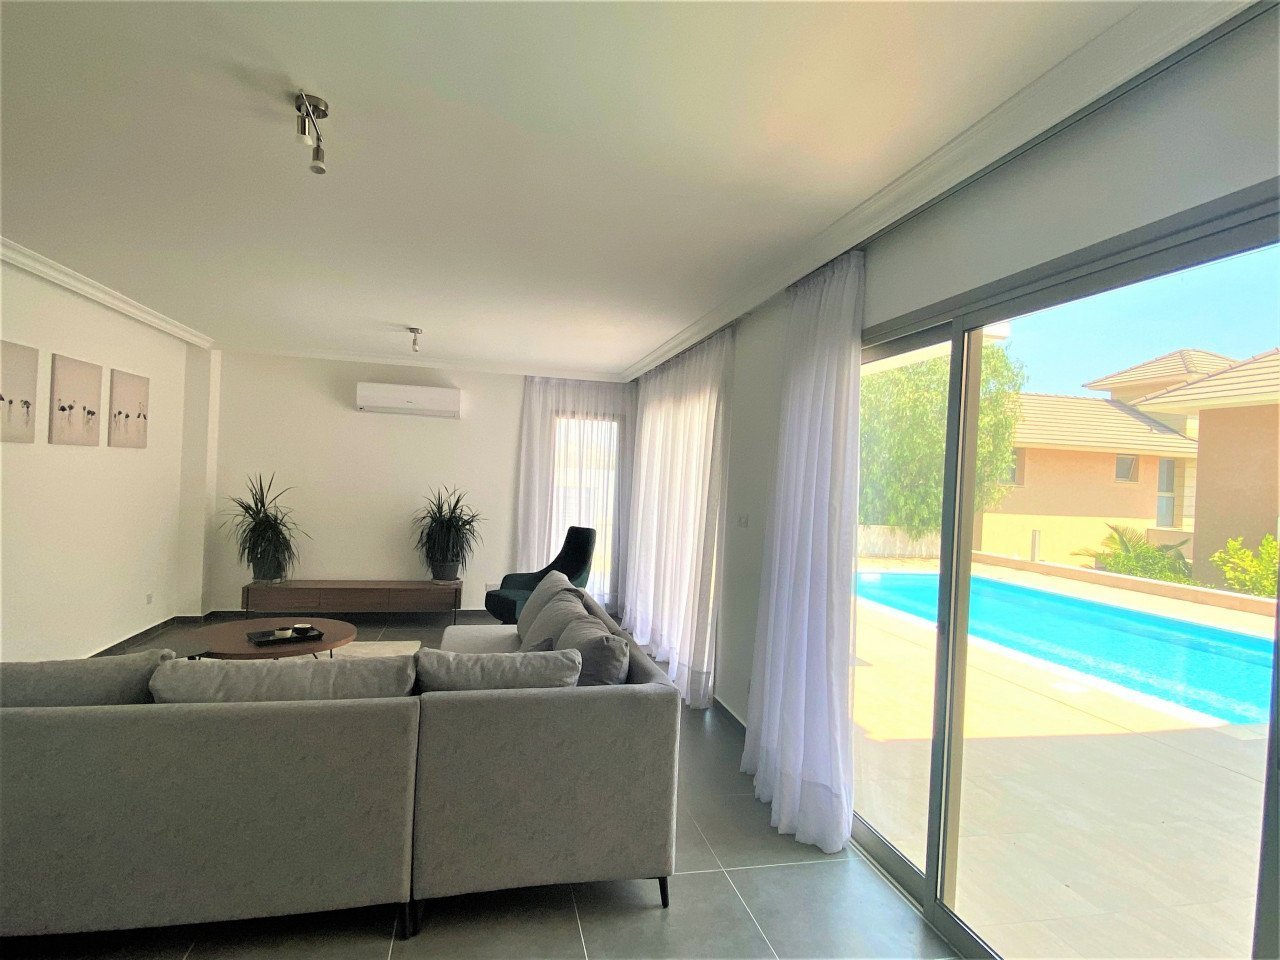 Property for Rent: House (Detached) in Saint Raphael Area, Limassol for Rent | Key Realtor Cyprus